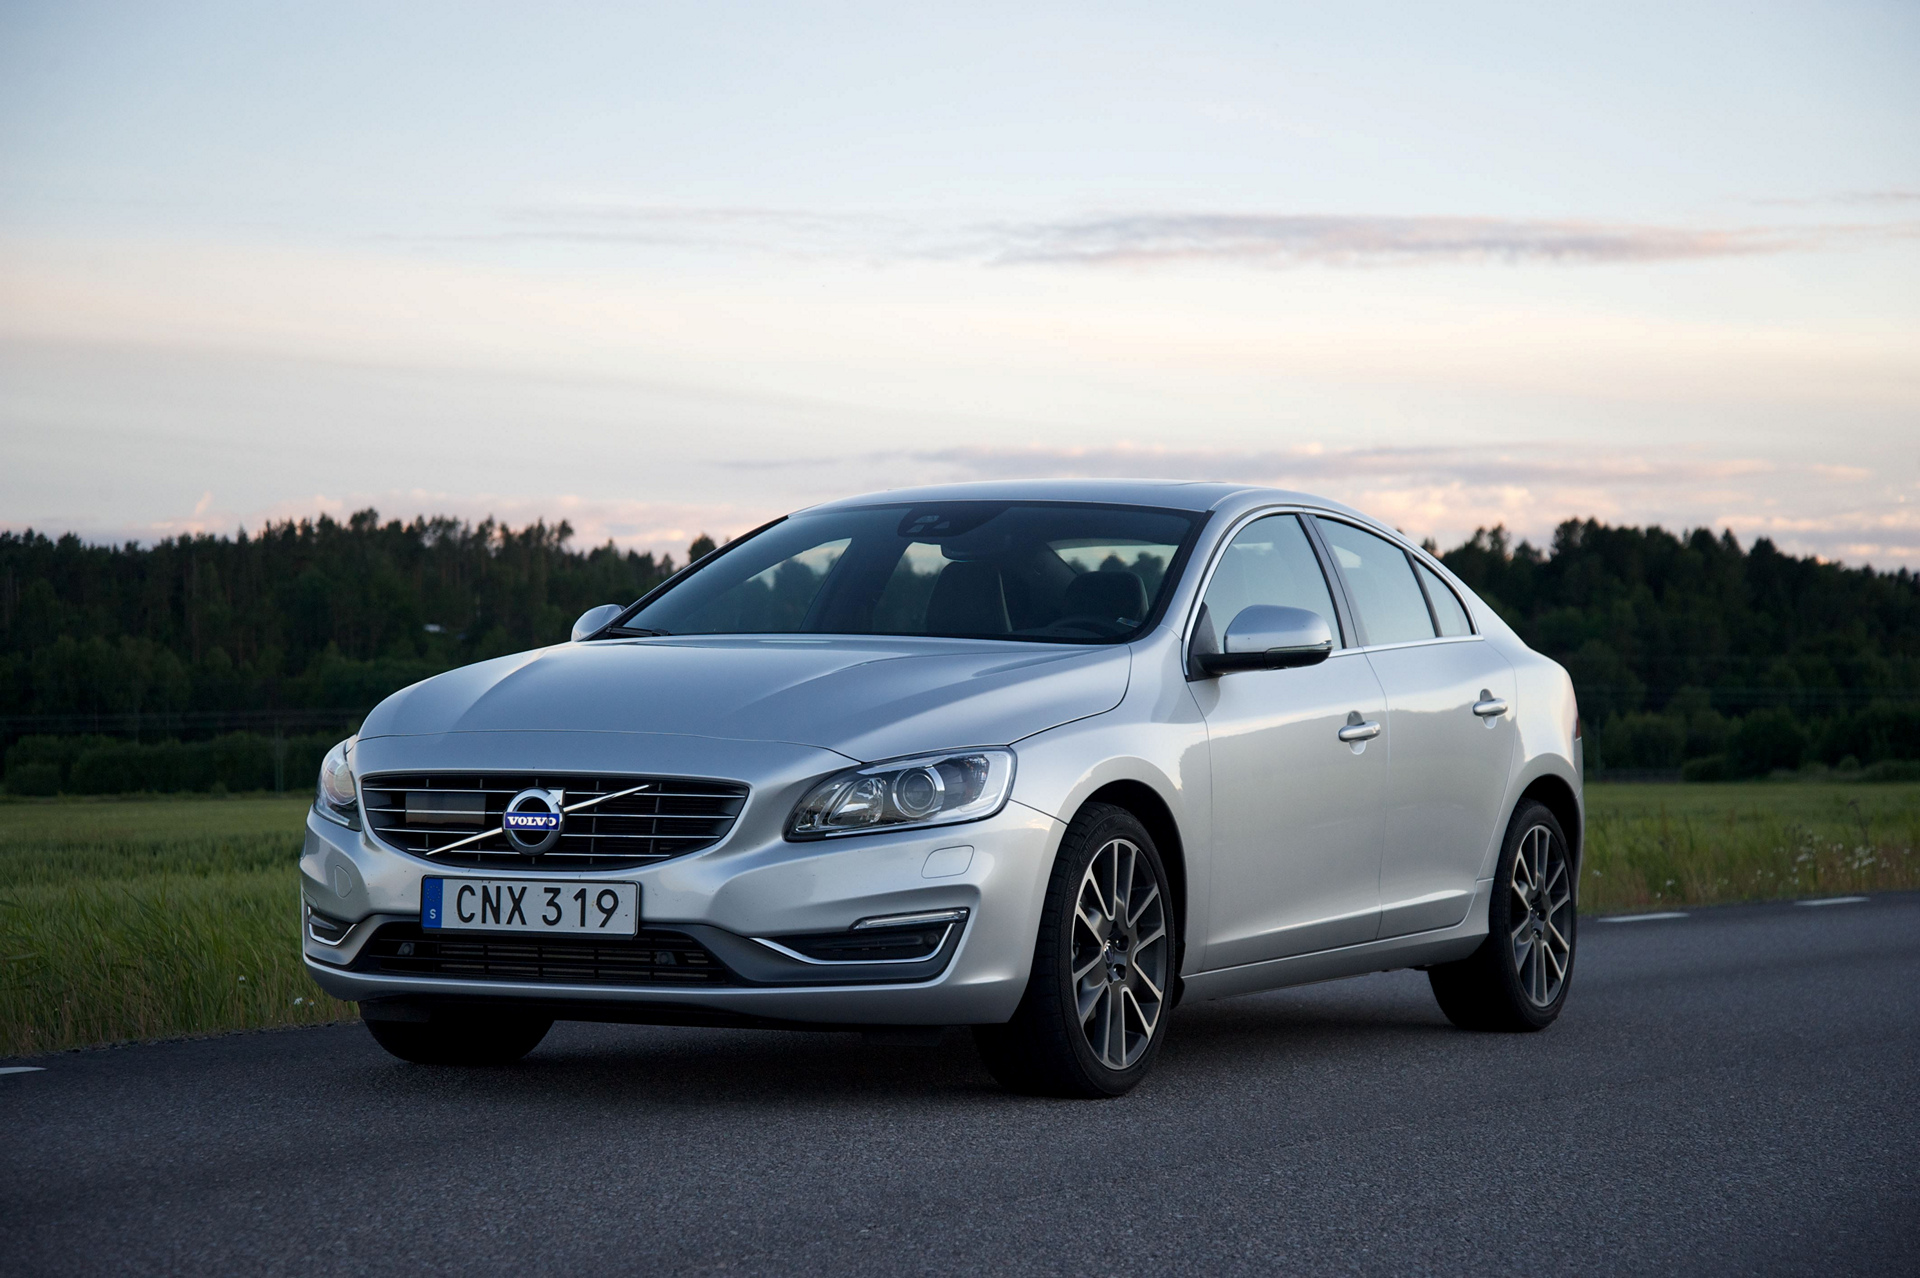 2016 Volvo S60 © Zhejiang Geely Holding Group Co., Ltd